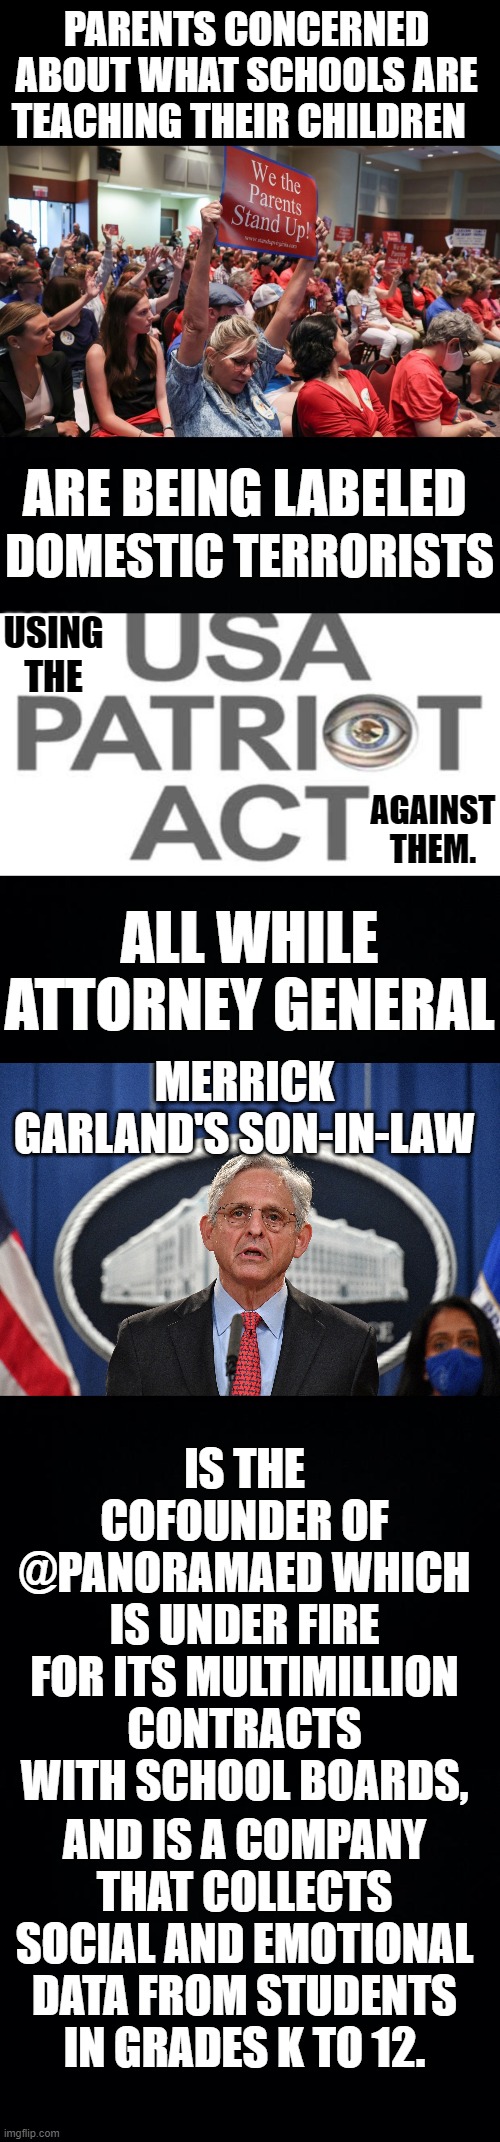 Always Follow The Money | PARENTS CONCERNED ABOUT WHAT SCHOOLS ARE TEACHING THEIR CHILDREN; ARE BEING LABELED; DOMESTIC TERRORISTS; USING THE; AGAINST THEM. ALL WHILE ATTORNEY GENERAL; MERRICK GARLAND'S SON-IN-LAW; IS THE COFOUNDER OF @PANORAMAED WHICH IS UNDER FIRE FOR ITS MULTIMILLION CONTRACTS WITH SCHOOL BOARDS, AND IS A COMPANY THAT COLLECTS SOCIAL AND EMOTIONAL DATA FROM STUDENTS IN GRADES K TO 12. | image tagged in memes,politics,parents,objection,attorney general,conflict | made w/ Imgflip meme maker